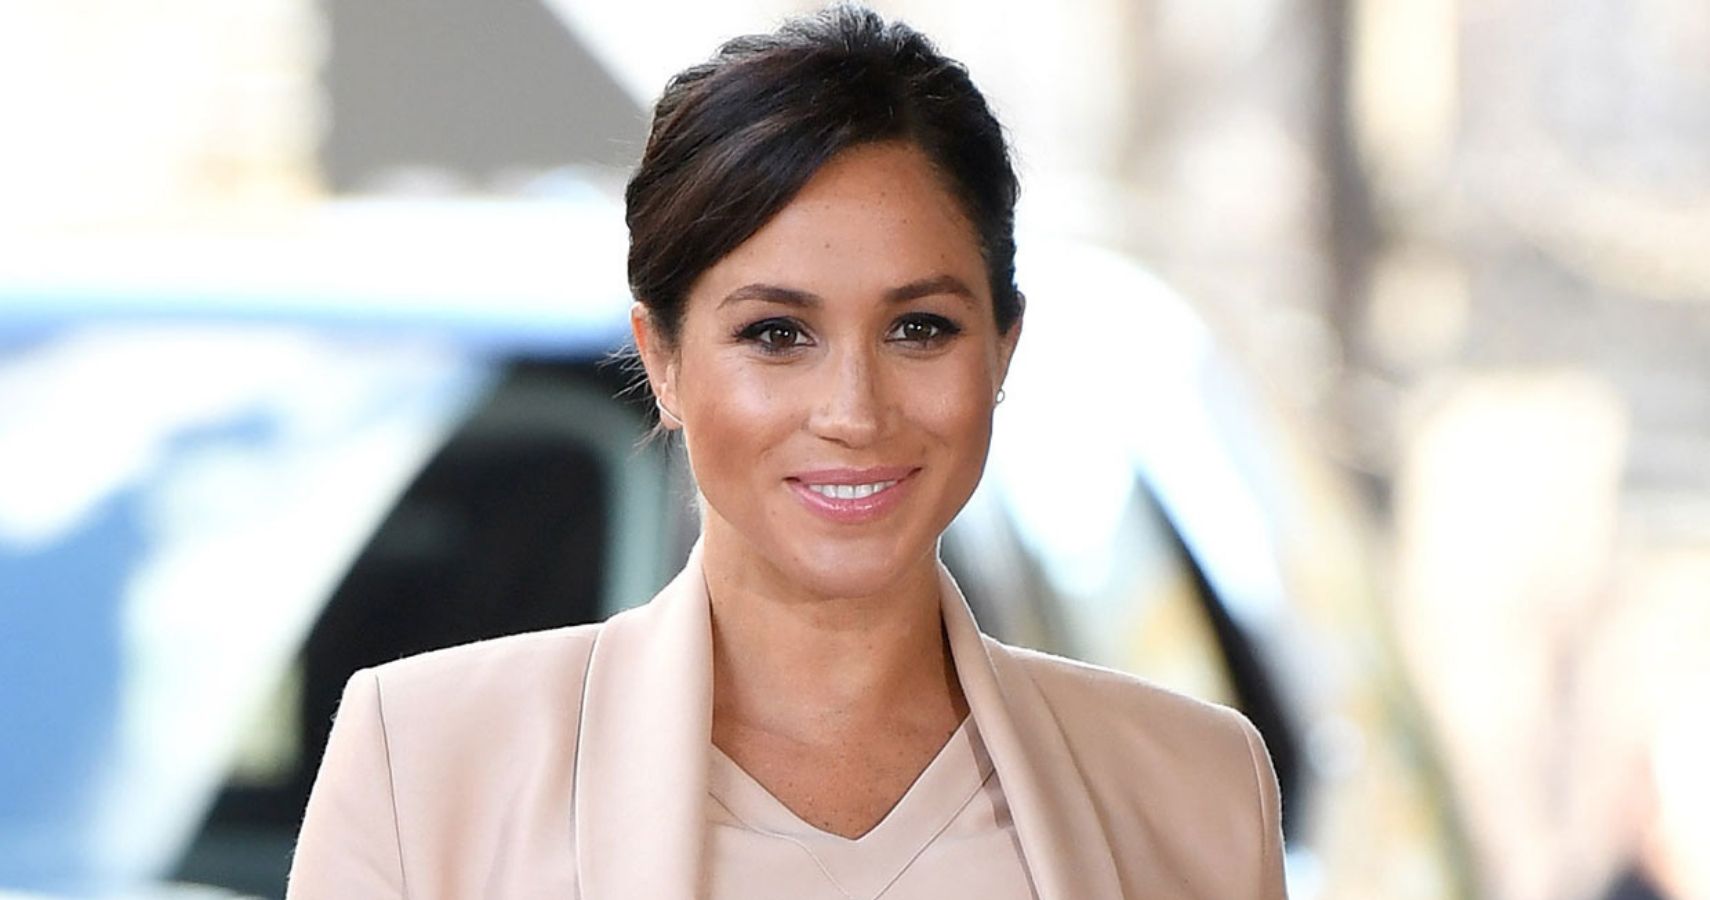 Meghan Markle Fills Her Maternity Leave With Projects Close To Her Heart